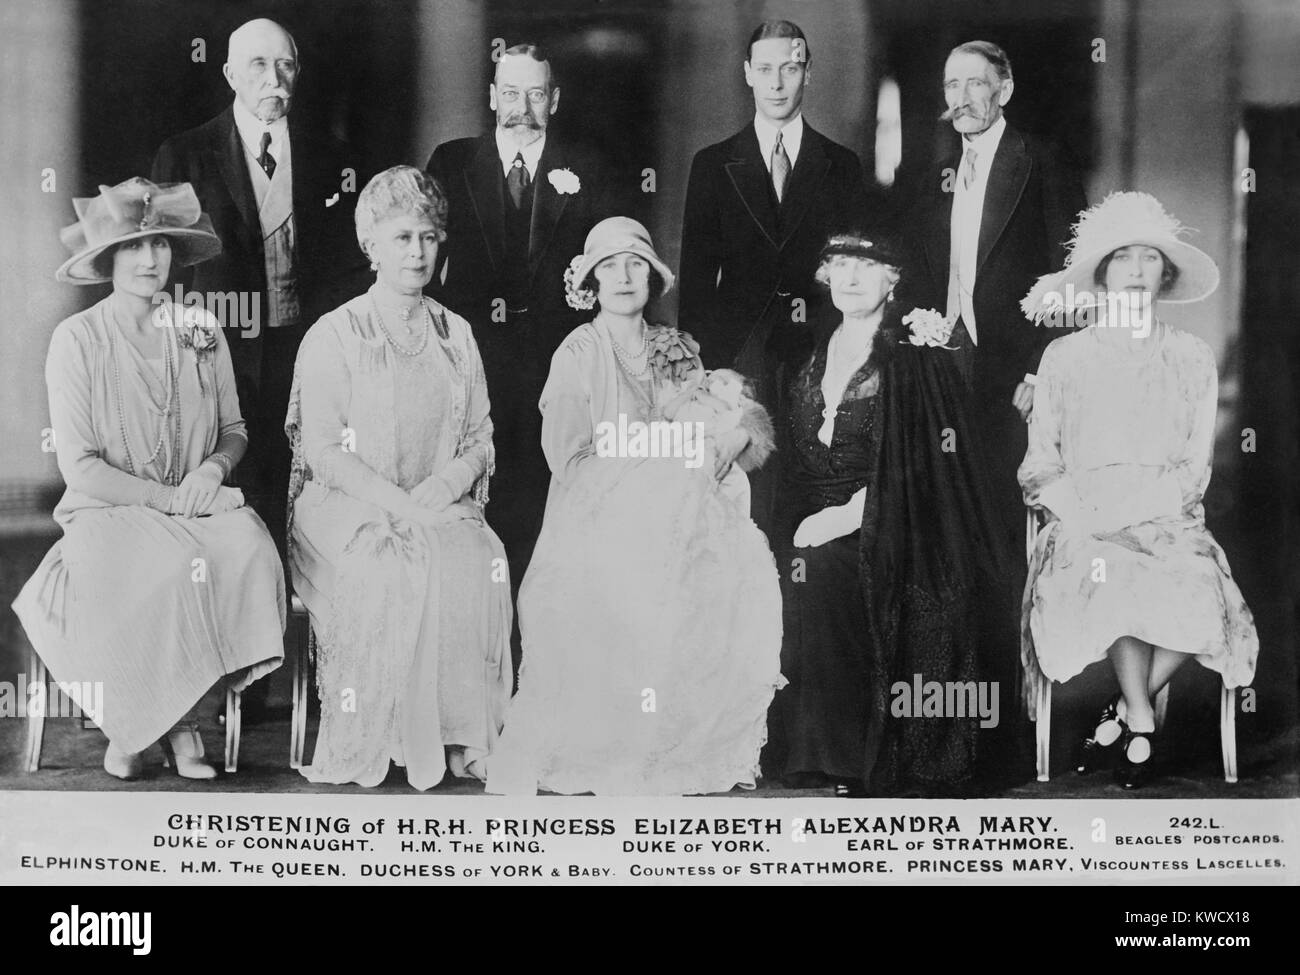 1926 christening of H.R.H. Princess Elizabeth, who became Queen Elizabeth II. Members of the British family, seated: Lady Elphinstone; Queen Mary; Duchess of York and baby Princess Elizabeth; Countess of Strathmore; Princess Mary, Viscountess Lascelles. S (BSLOC 2017 1 88) Stock Photo